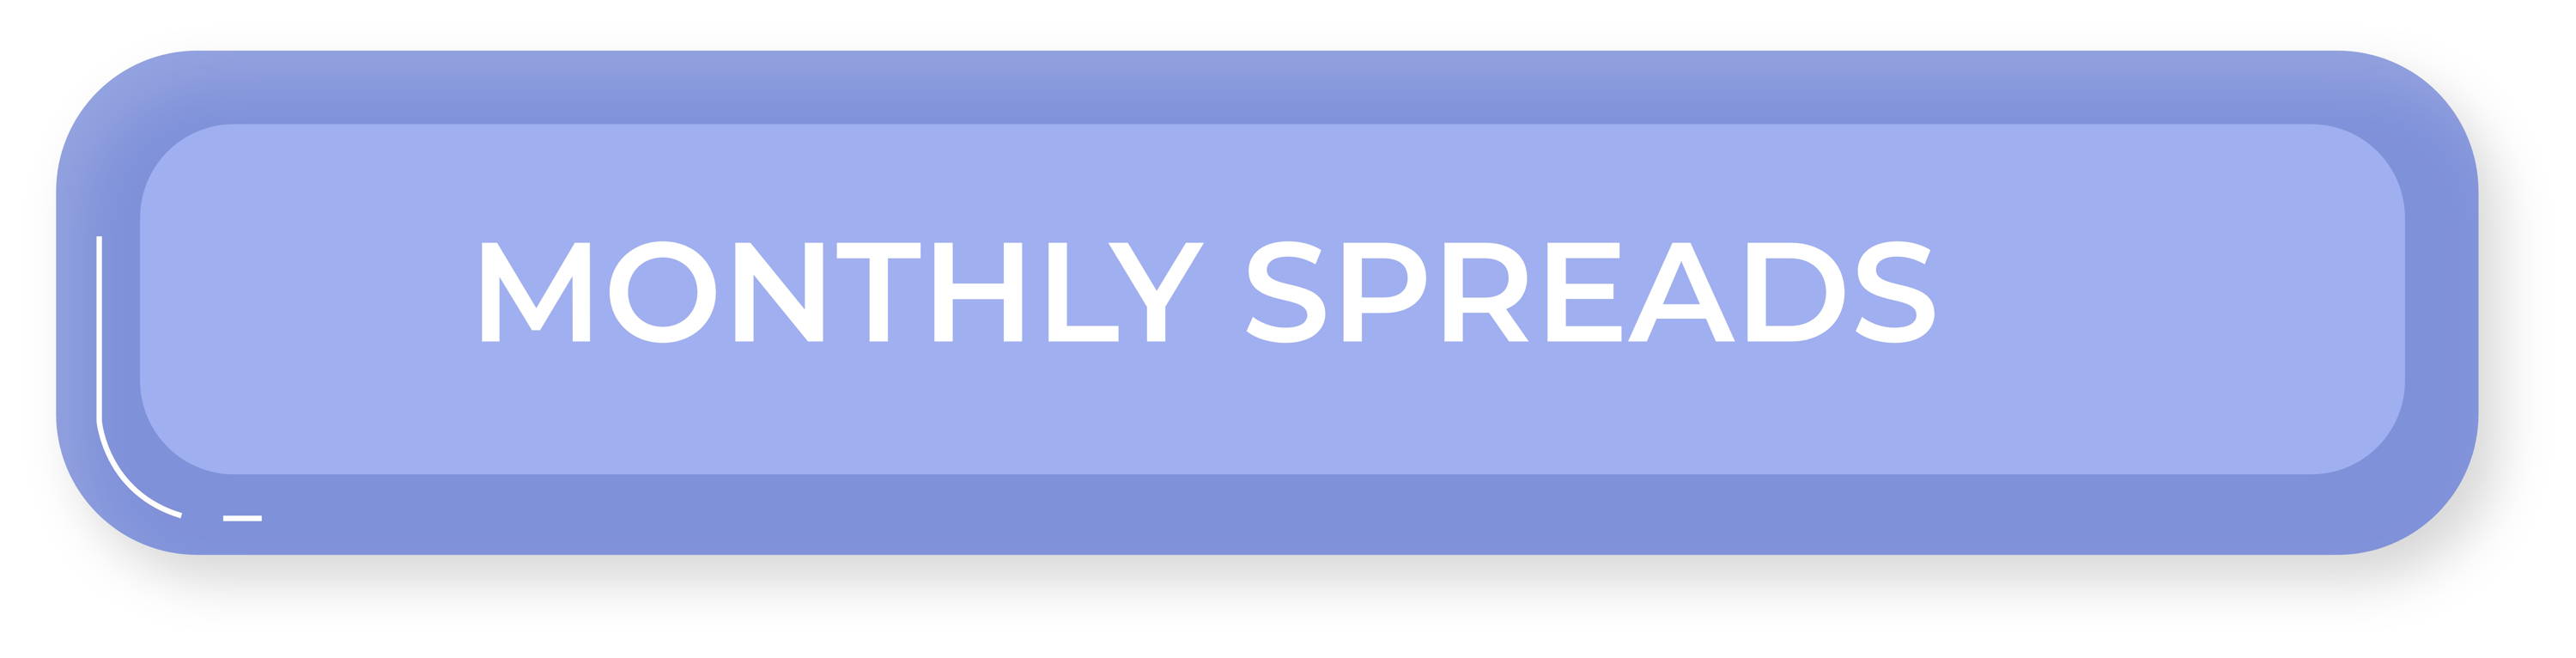 browse by monthly spreads 